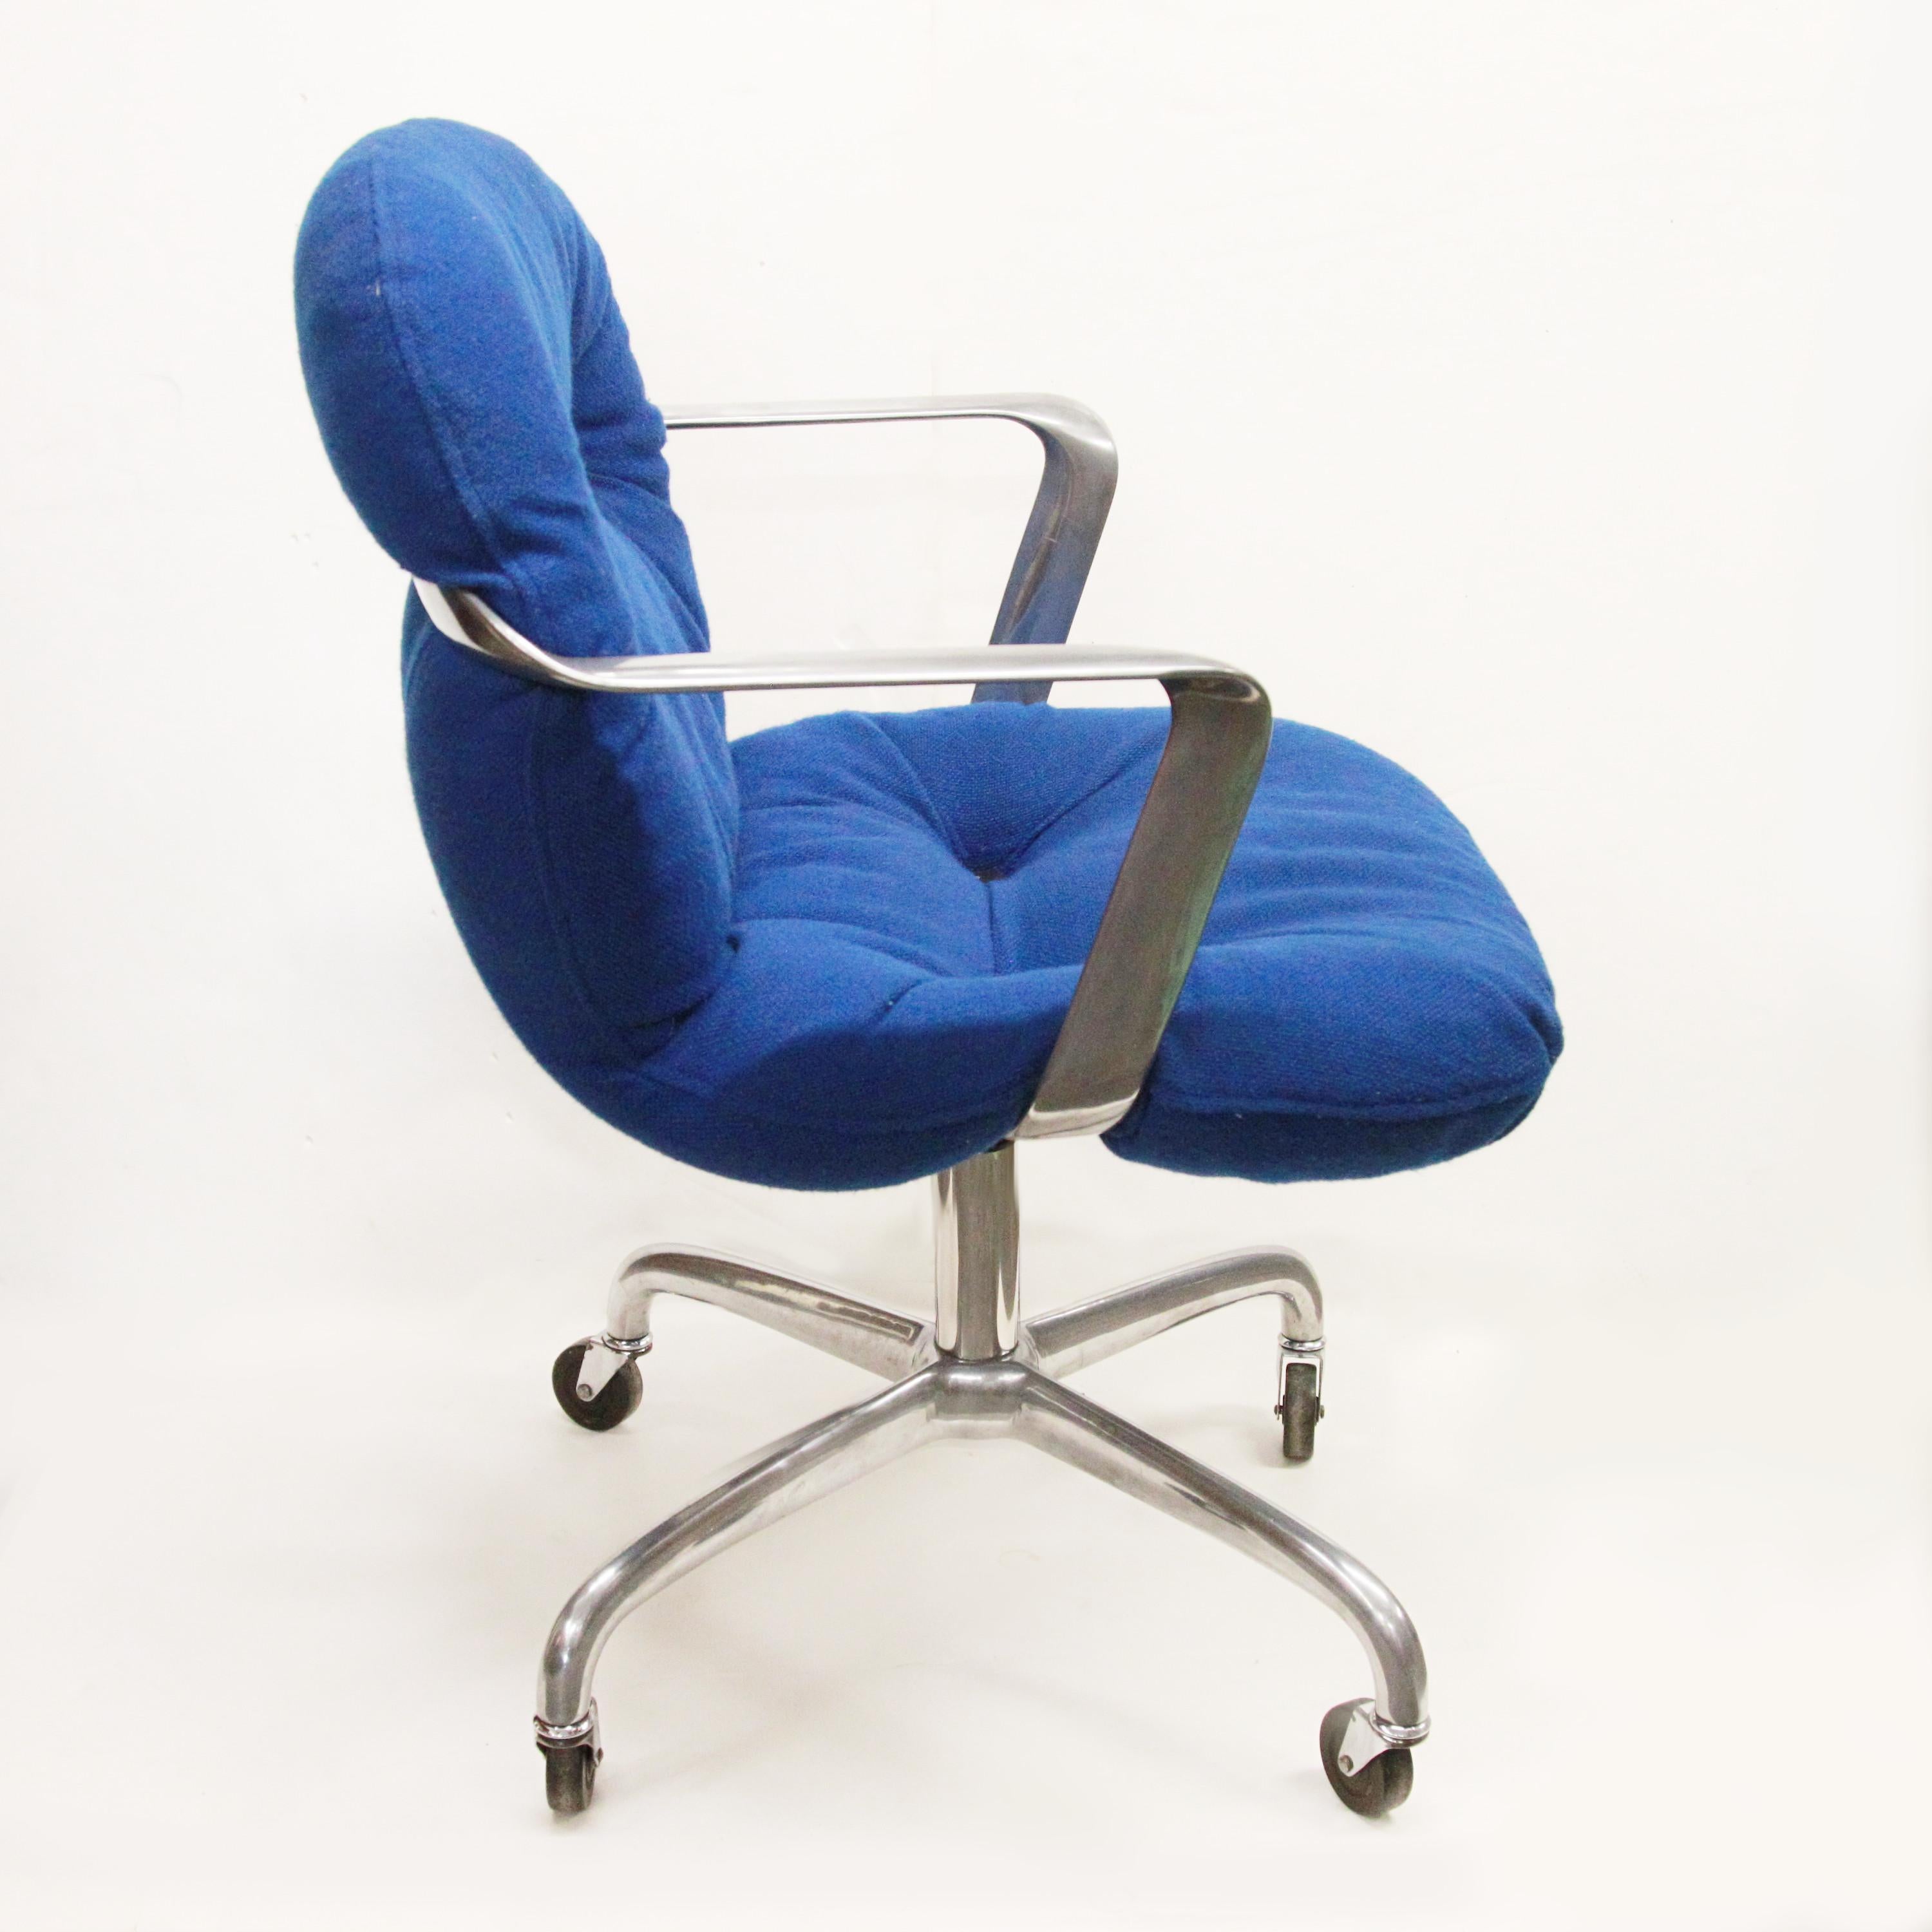 North American Mid-Century Modern Swivel Desk Chair by Andrew Morrison & Bruce Hannah for Knoll For Sale